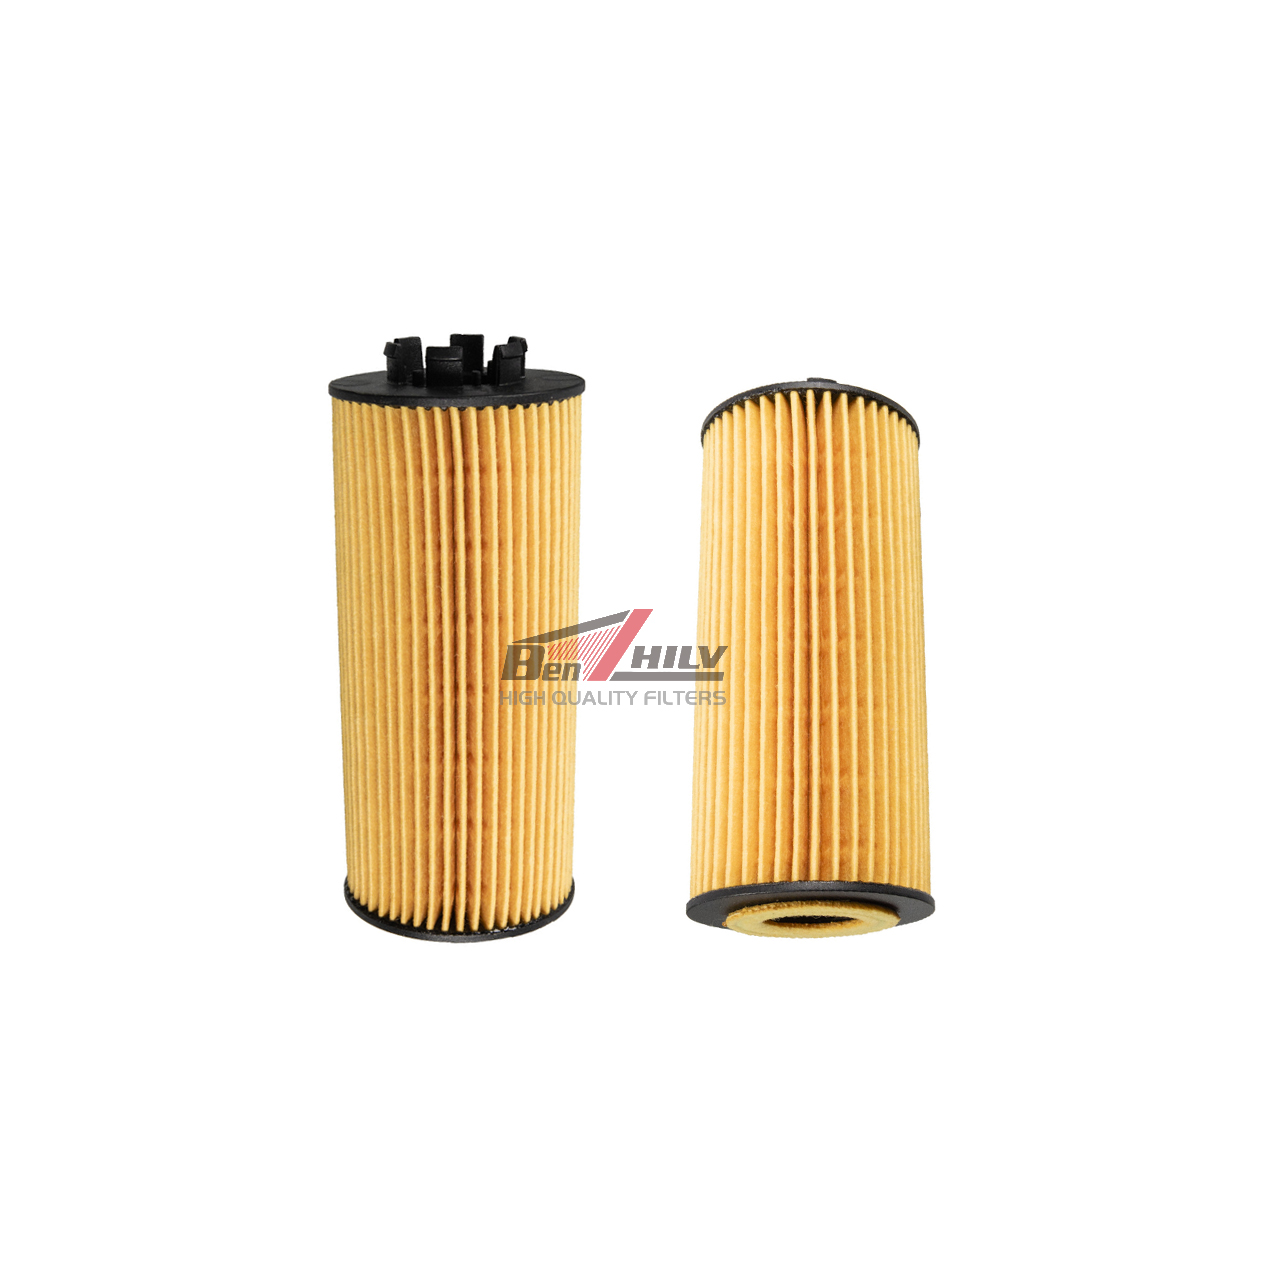 11428593186 Lubricate the oil filter element